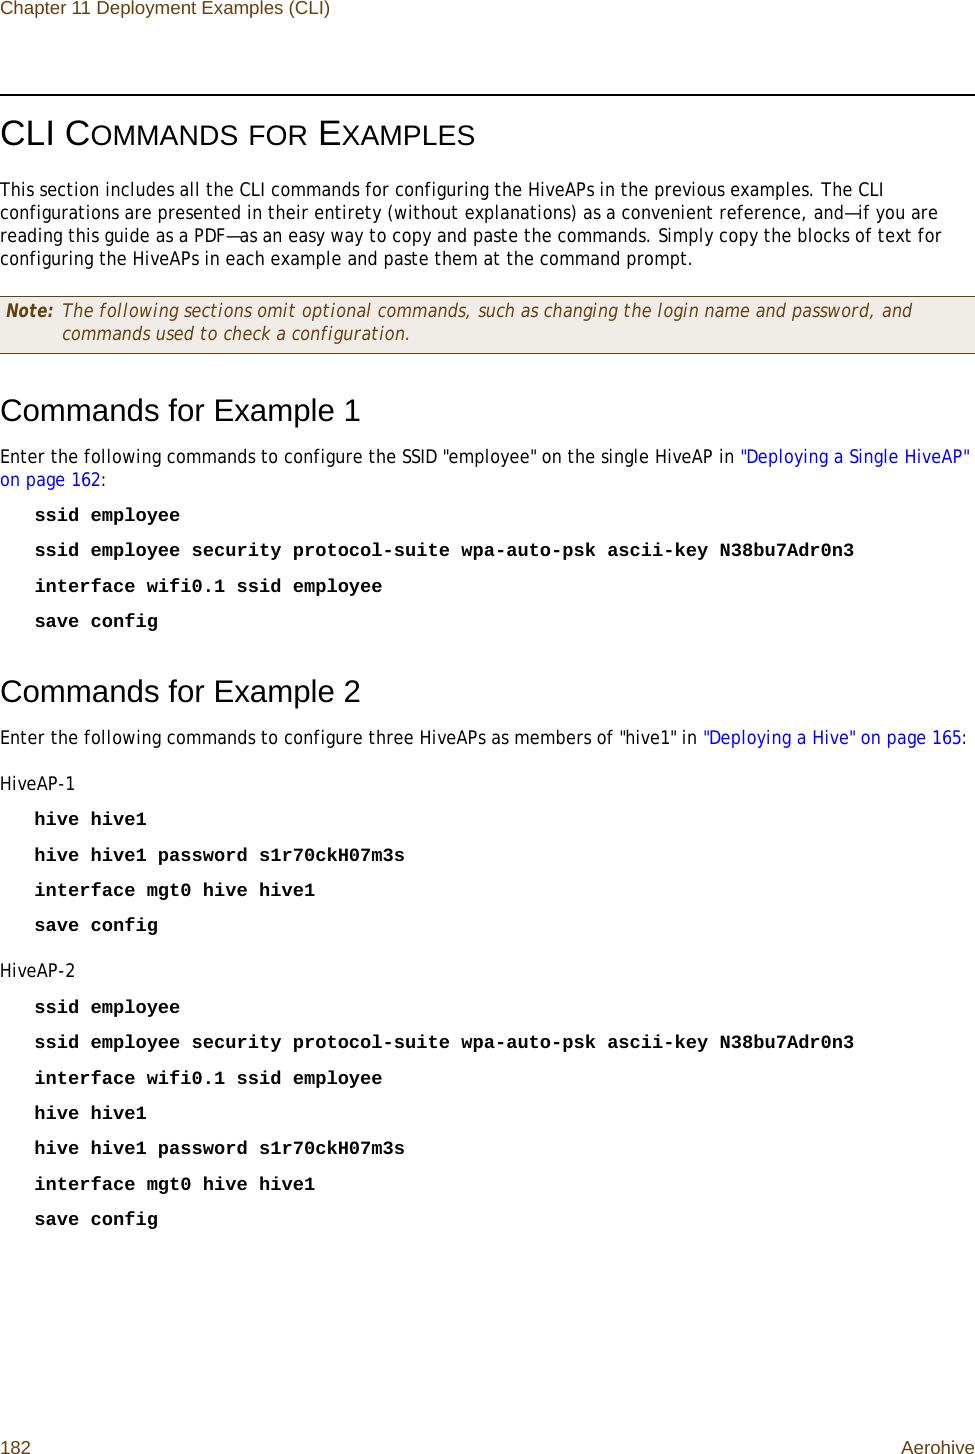 Chapter 11 Deployment Examples (CLI)182 AerohiveCLI COMMANDS FOR EXAMPLESThis section includes all the CLI commands for configuring the HiveAPs in the previous examples. The CLI configurations are presented in their entirety (without explanations) as a convenient reference, and—if you are reading this guide as a PDF—as an easy way to copy and paste the commands. Simply copy the blocks of text for configuring the HiveAPs in each example and paste them at the command prompt.Commands for Example 1Enter the following commands to configure the SSID &quot;employee&quot; on the single HiveAP in &quot;Deploying a Single HiveAP&quot; on page 162:ssid employeessid employee security protocol-suite wpa-auto-psk ascii-key N38bu7Adr0n3interface wifi0.1 ssid employeesave configCommands for Example 2Enter the following commands to configure three HiveAPs as members of &quot;hive1&quot; in &quot;Deploying a Hive&quot; on page 165:HiveAP-1hive hive1hive hive1 password s1r70ckH07m3sinterface mgt0 hive hive1save configHiveAP-2ssid employeessid employee security protocol-suite wpa-auto-psk ascii-key N38bu7Adr0n3interface wifi0.1 ssid employeehive hive1hive hive1 password s1r70ckH07m3sinterface mgt0 hive hive1save configNote: The following sections omit optional commands, such as changing the login name and password, and commands used to check a configuration.